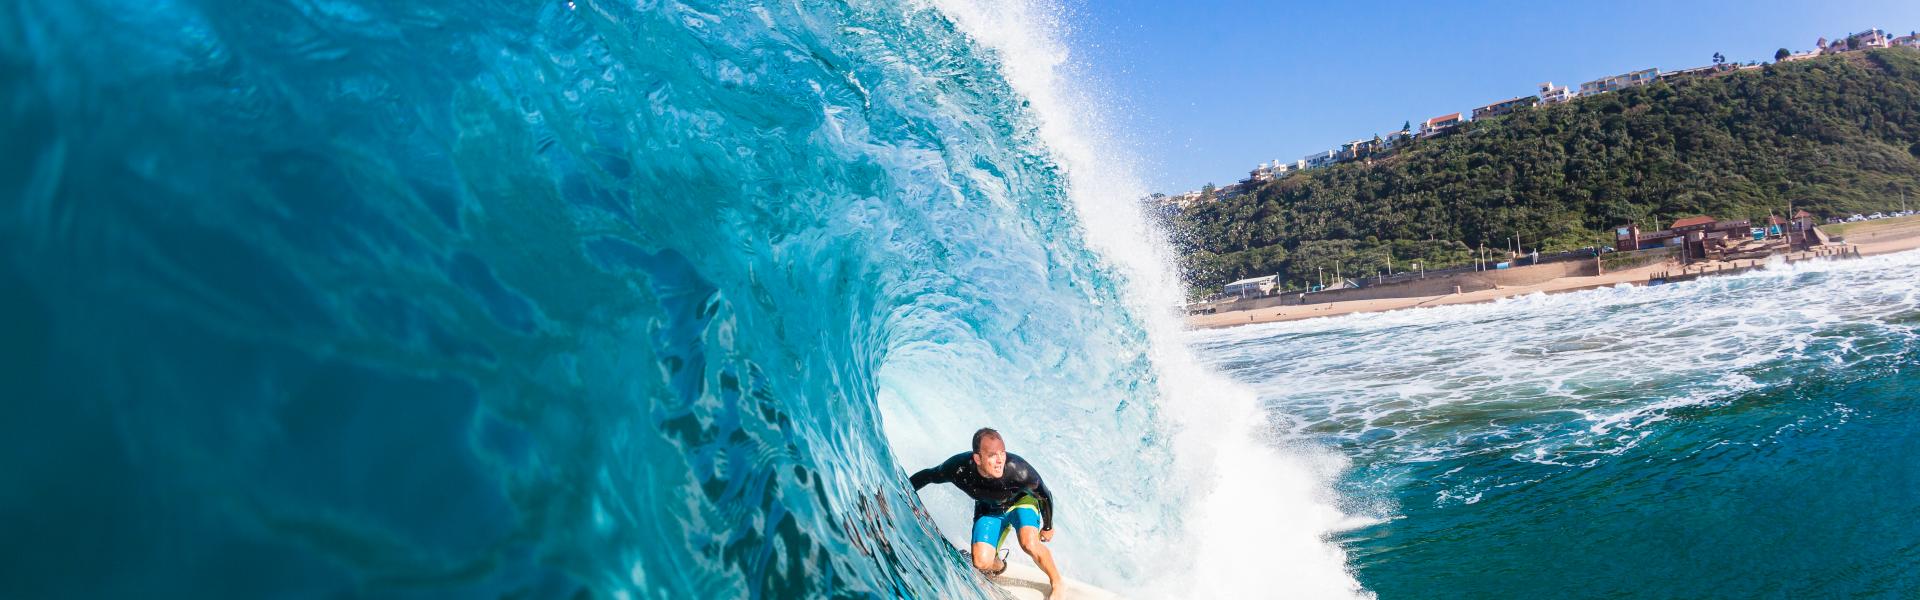 Surfing Vacations in Mexico - HomeToGo